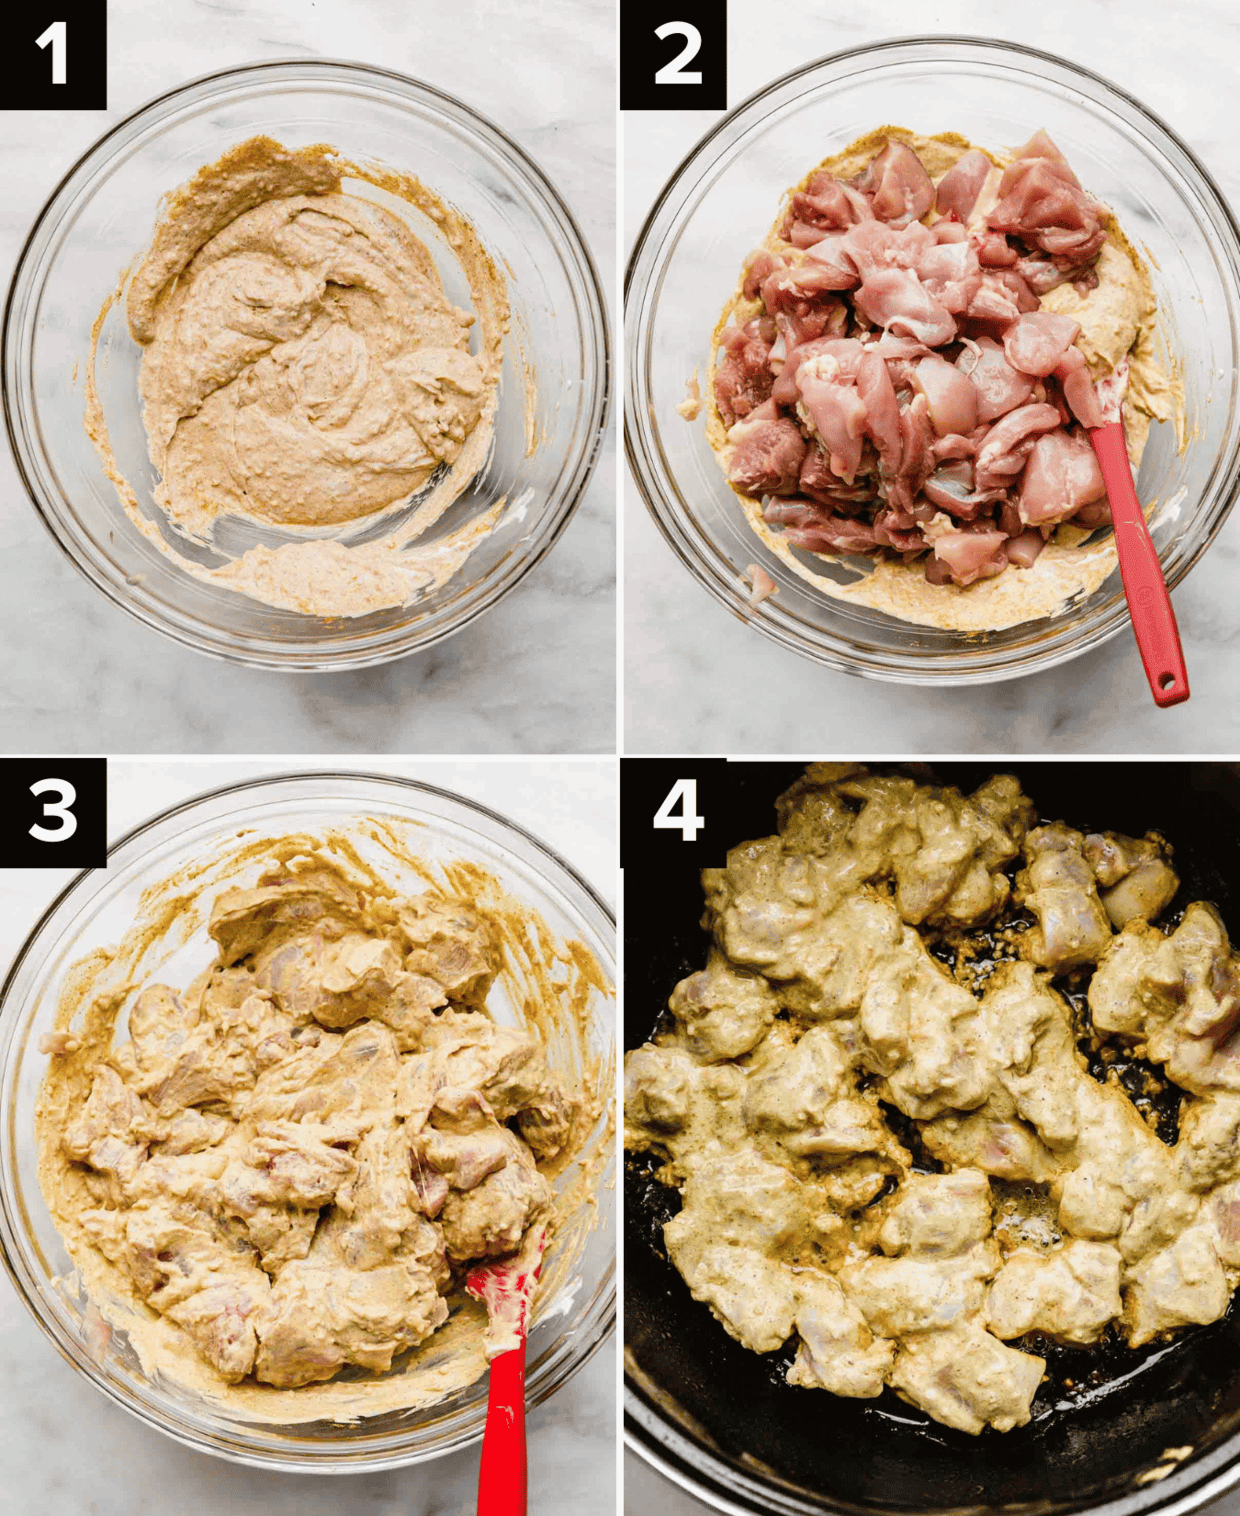 Four images showing how to make the best Chicken Tikka Masala recipe, top left is beige creamy mixture in glass bowl, top right is chicken thighs in glass bowl, bottom left is cream colored creamy mixture covering raw chicken thigh pieces, bottom right is light yellow coated chicken thighs in a skillet.